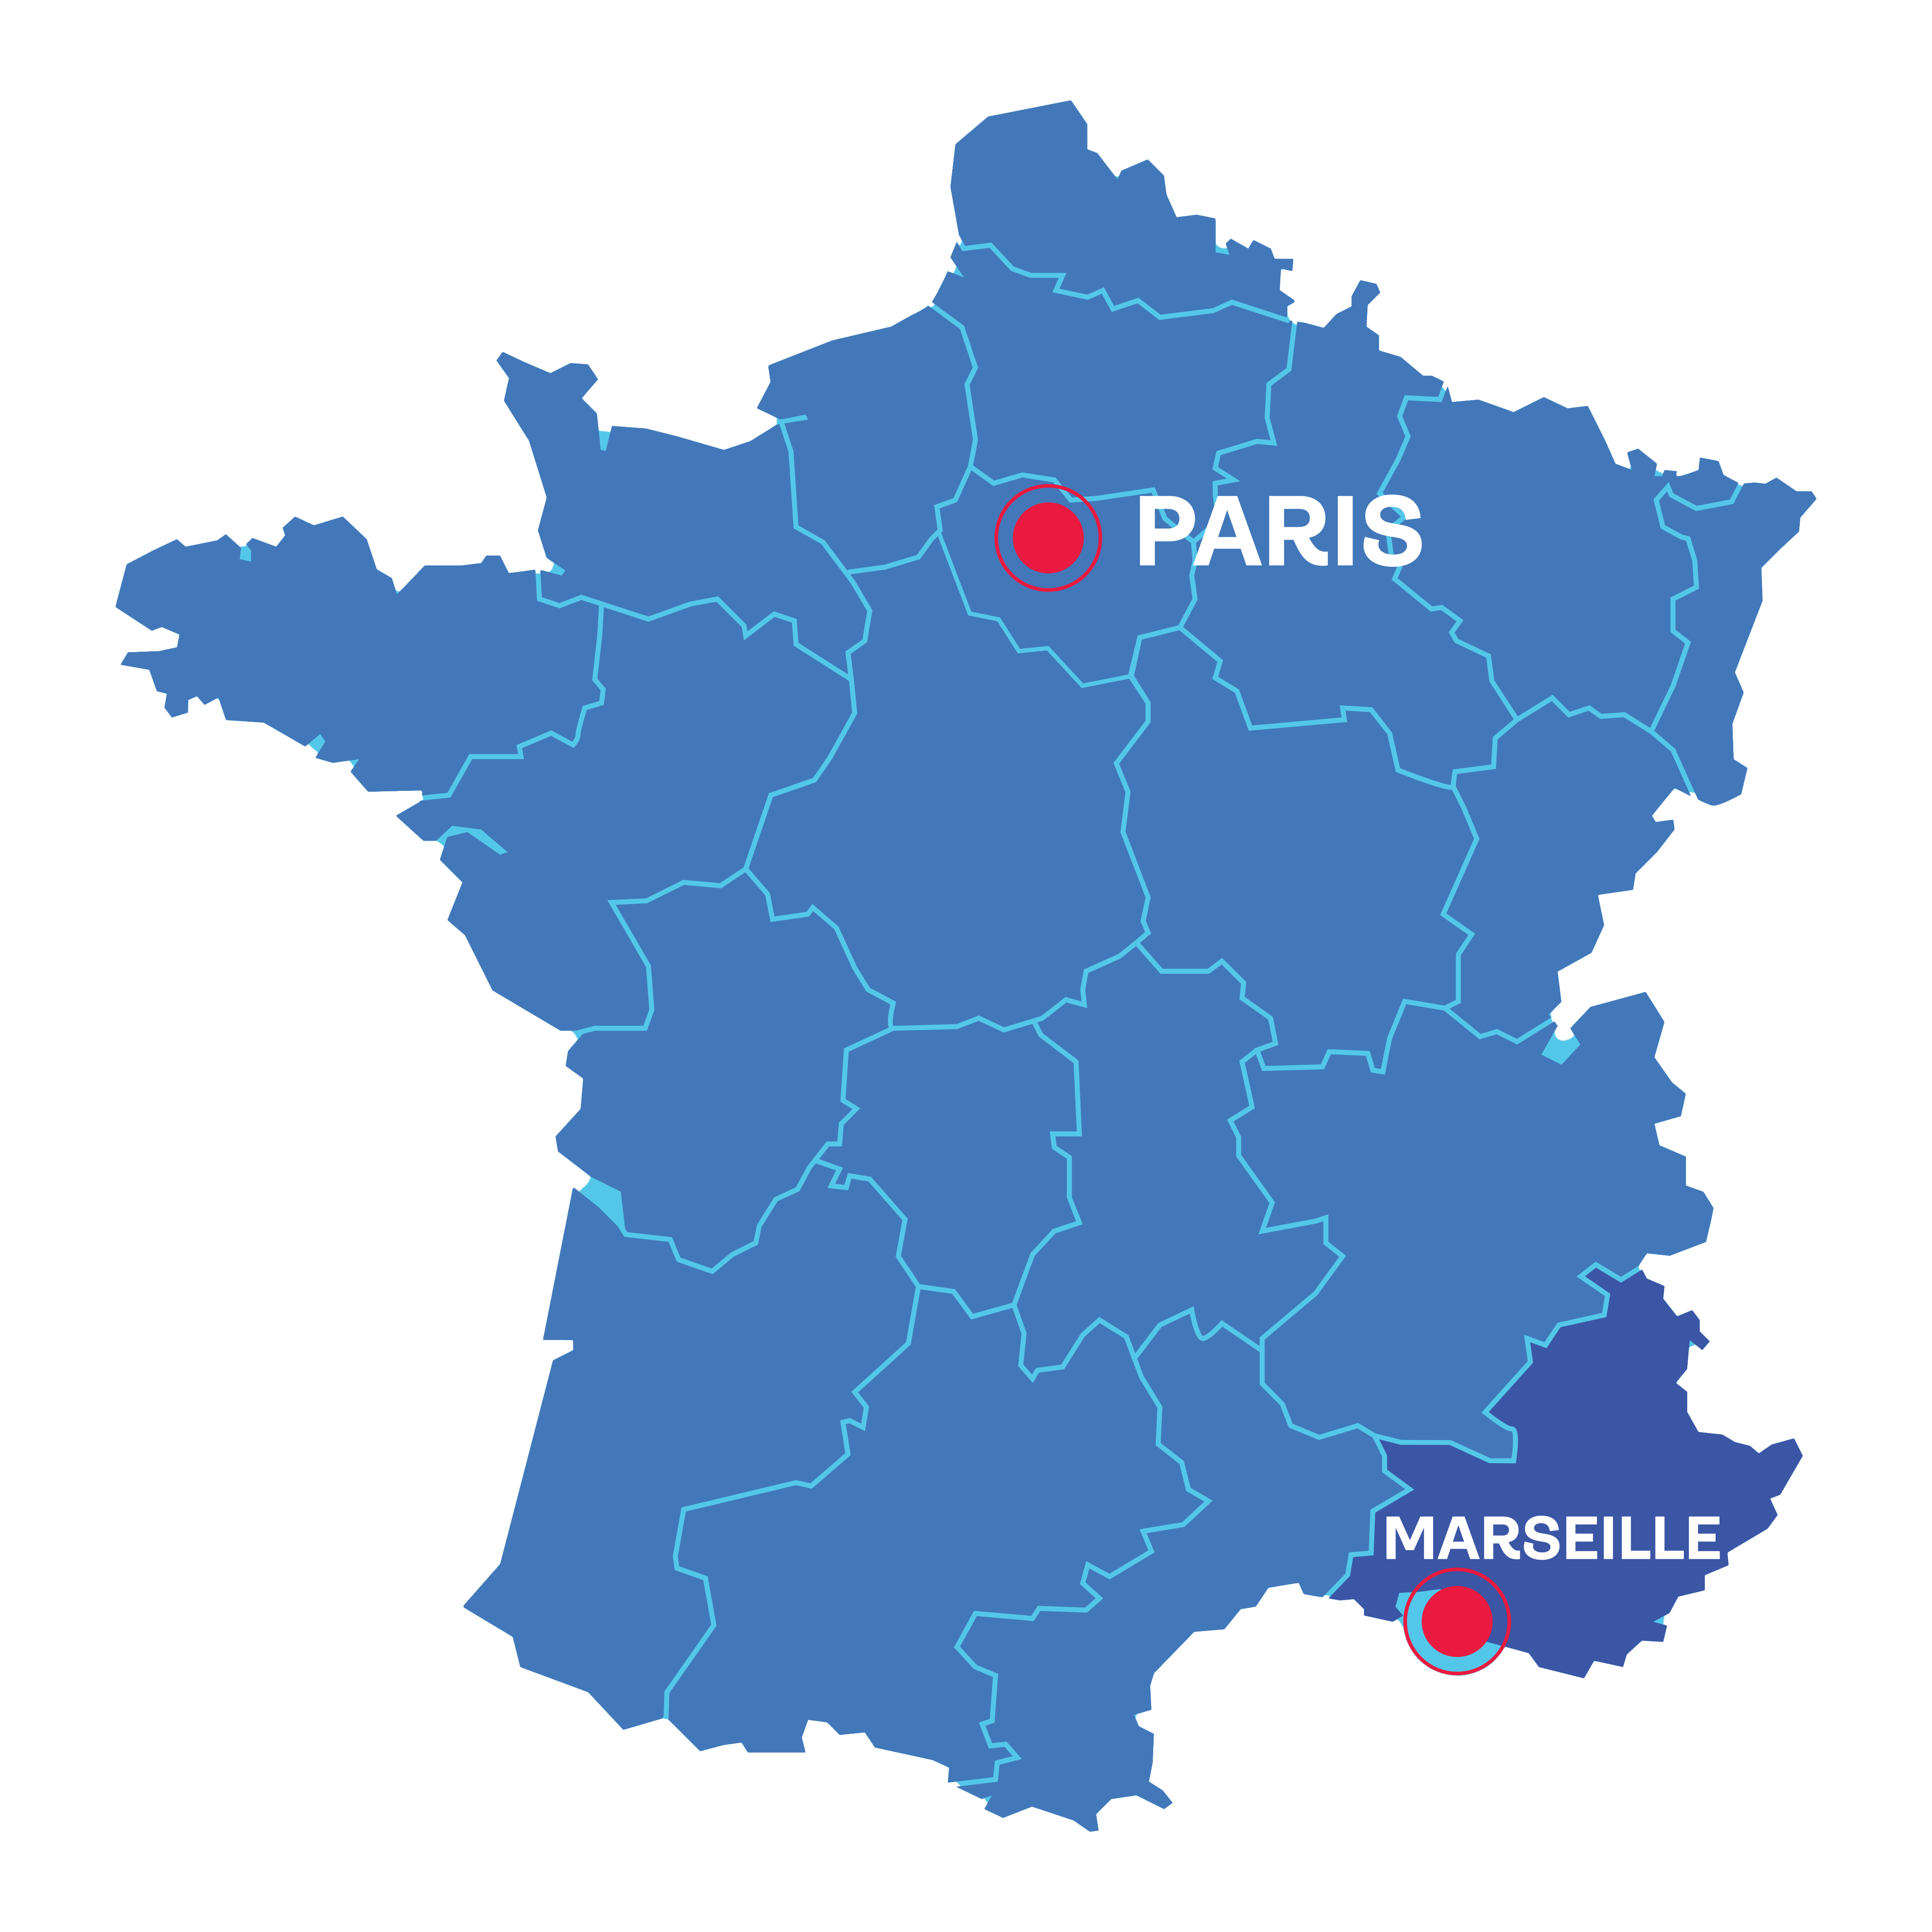 map of France to indicate where the 2024 Olympics will take place